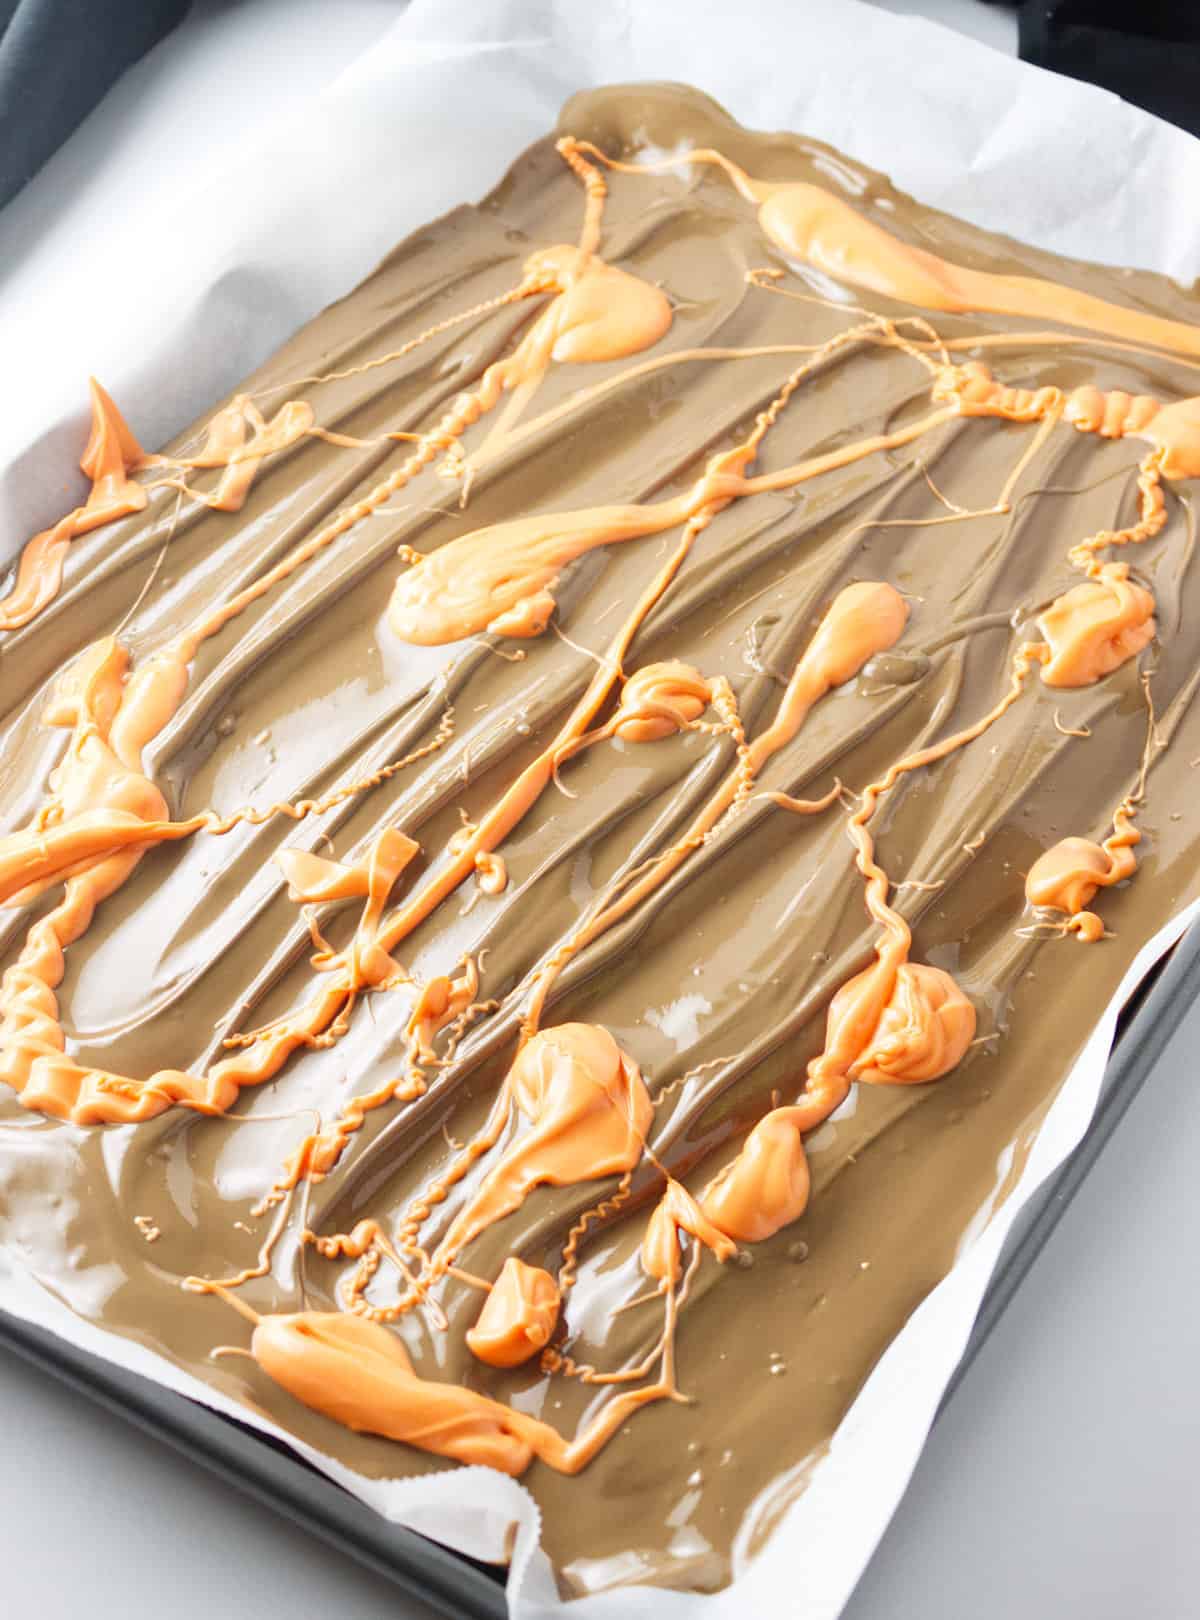 orange candy melts drizzled on a cookie sheet.